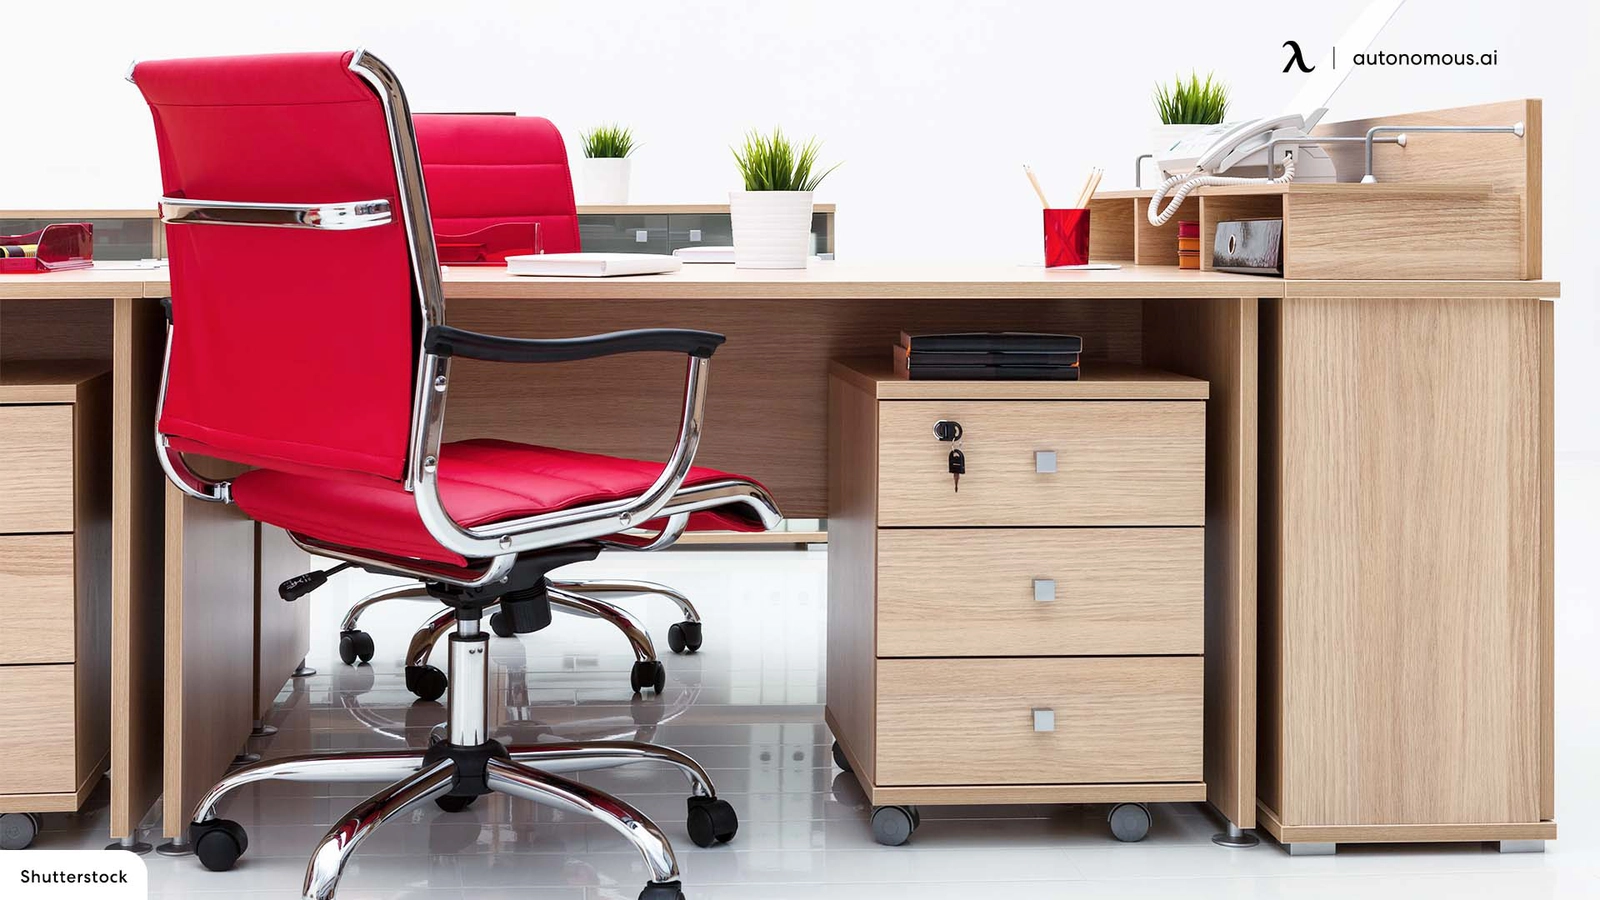 10 Elegant Red Office Chair With Arms Available in Market